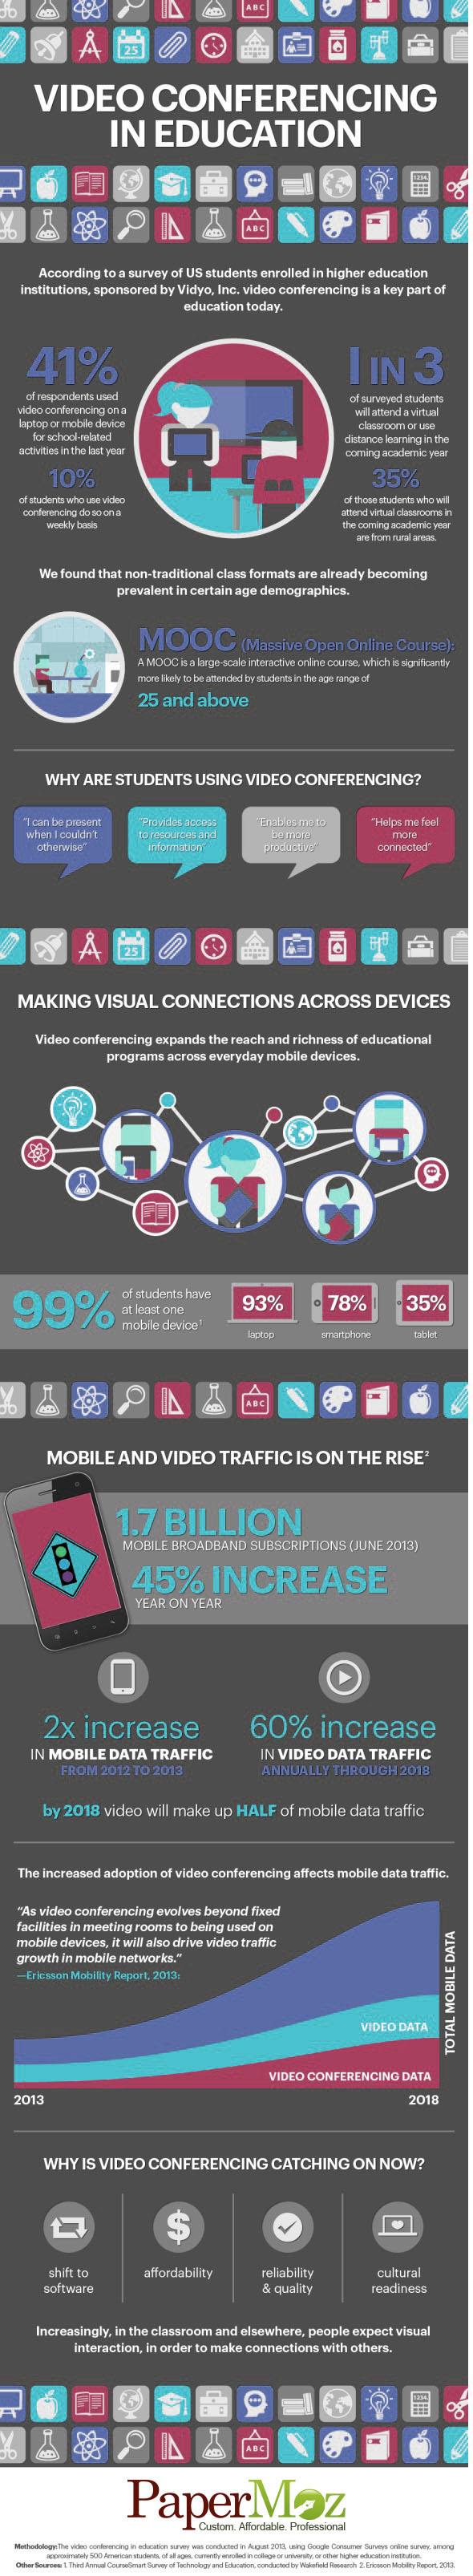 Education via Video Conferencing Infographic